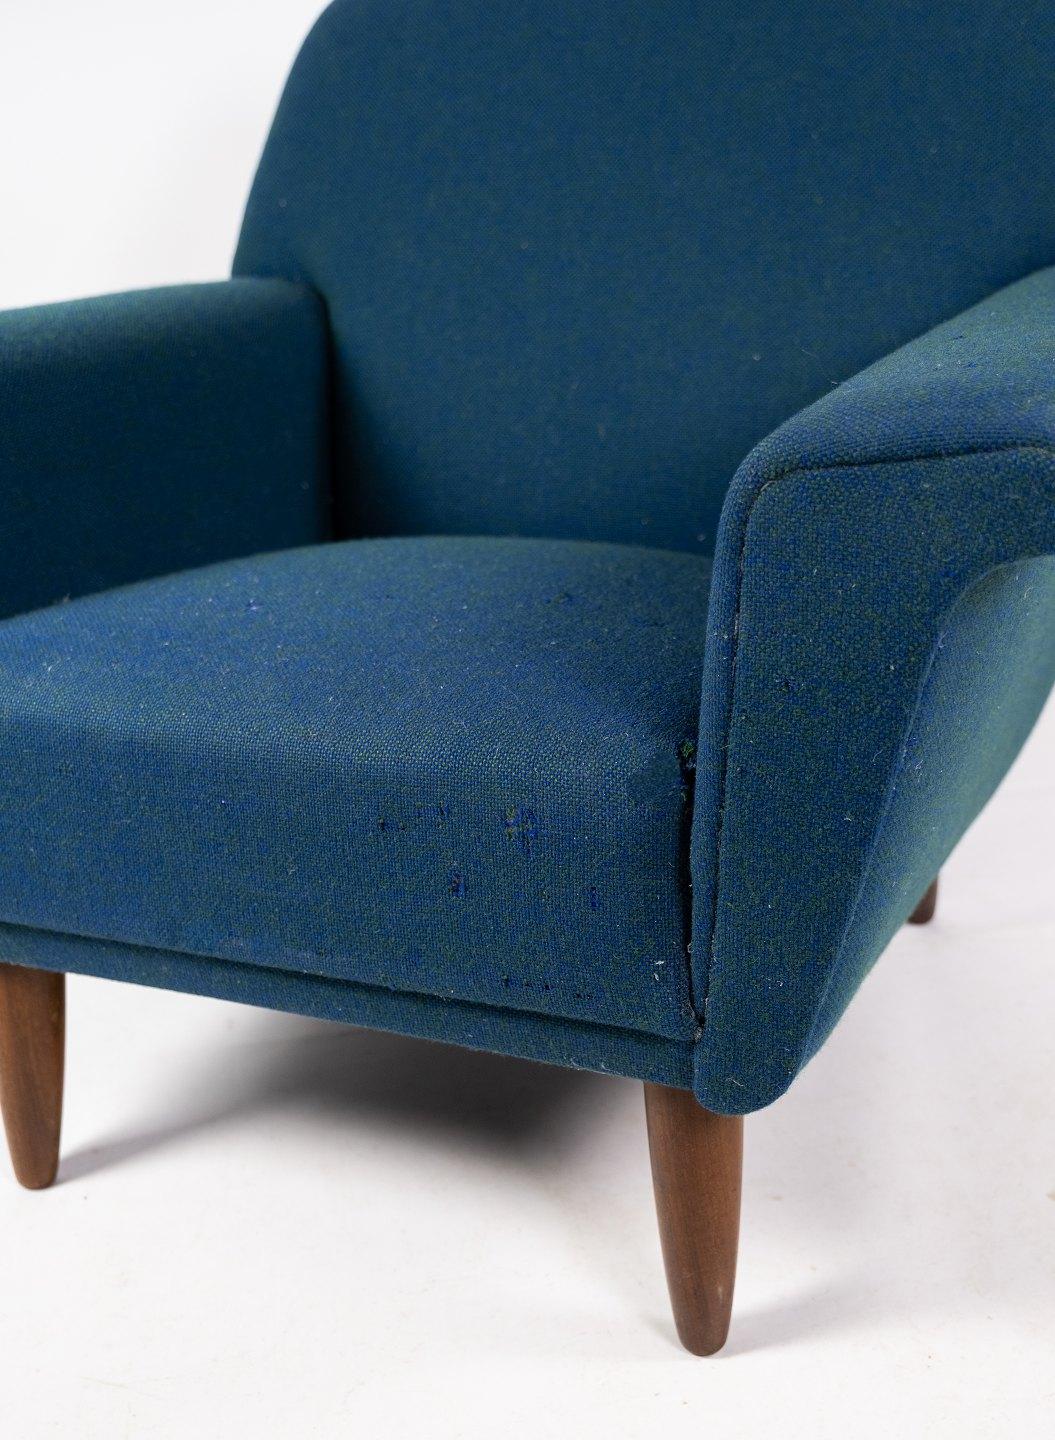 Danish Armchair Upholstered with Dark Blue Wool Fabric and Legs in Dark Wood, 1960s For Sale